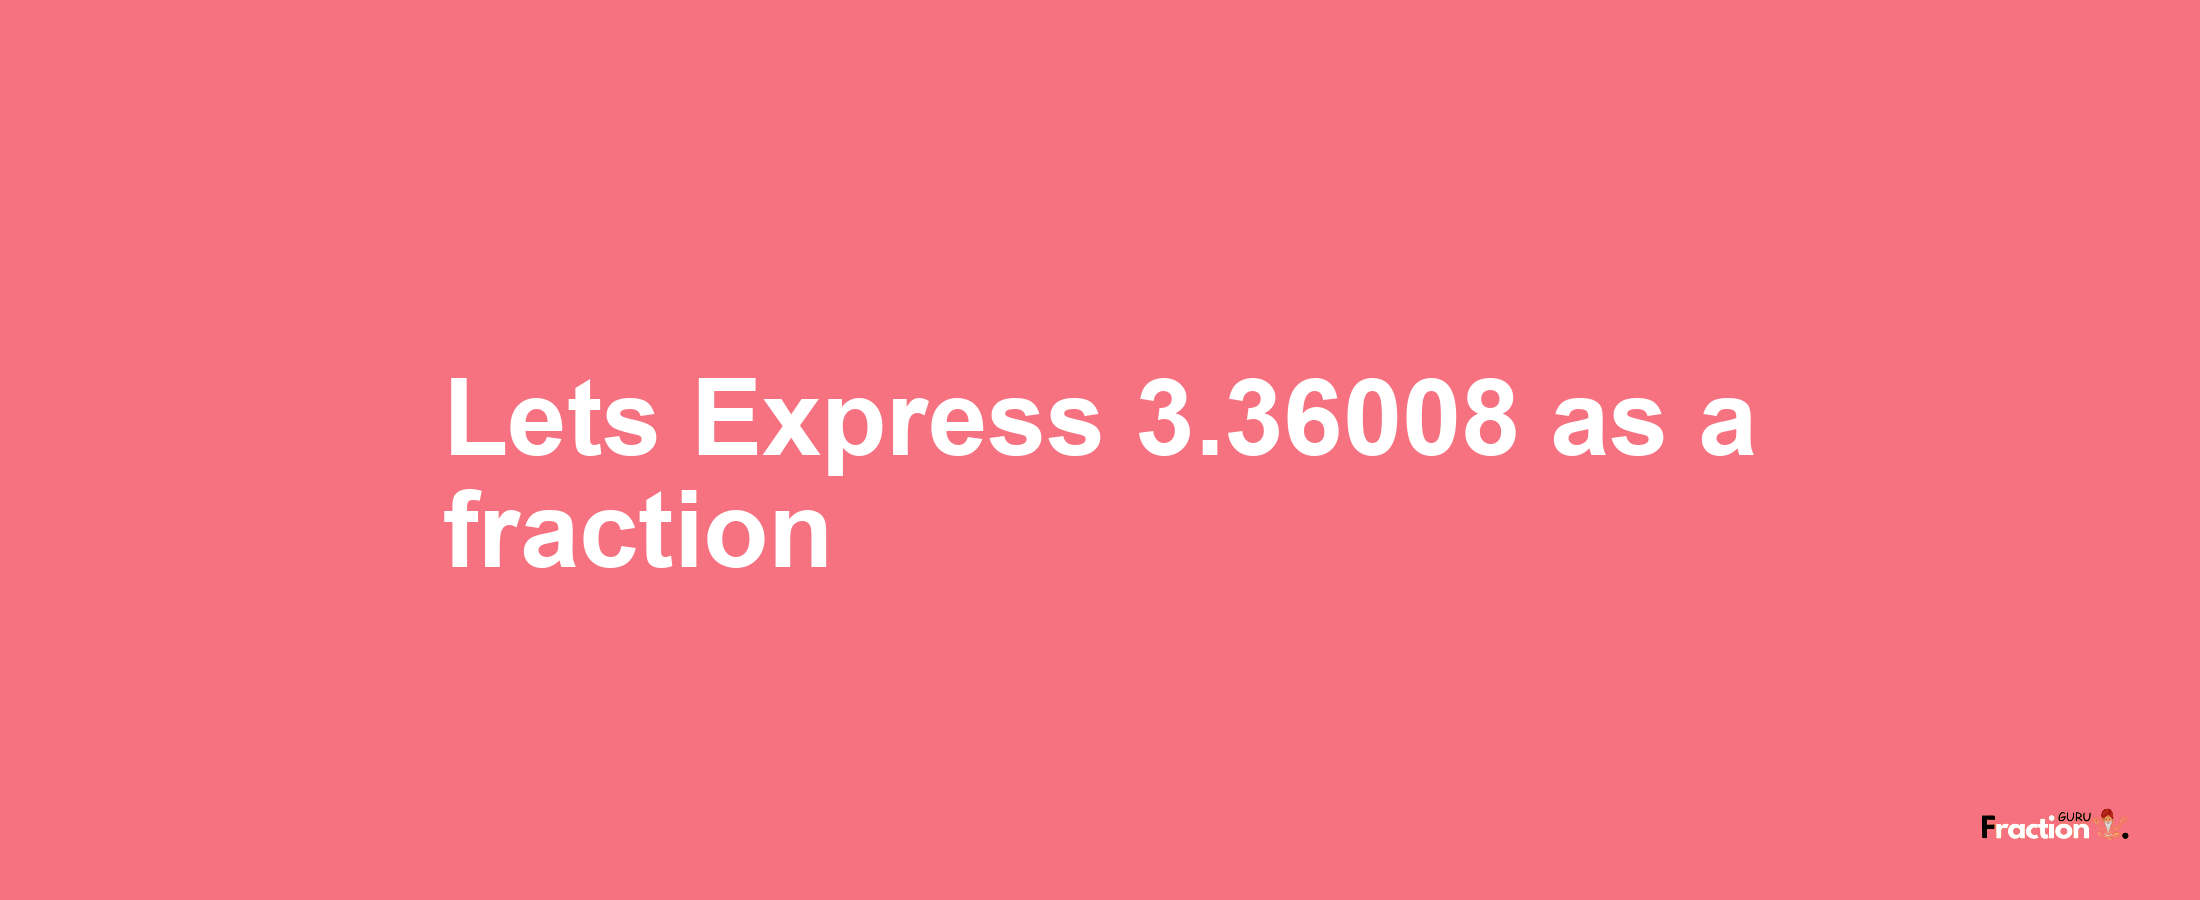 Lets Express 3.36008 as afraction